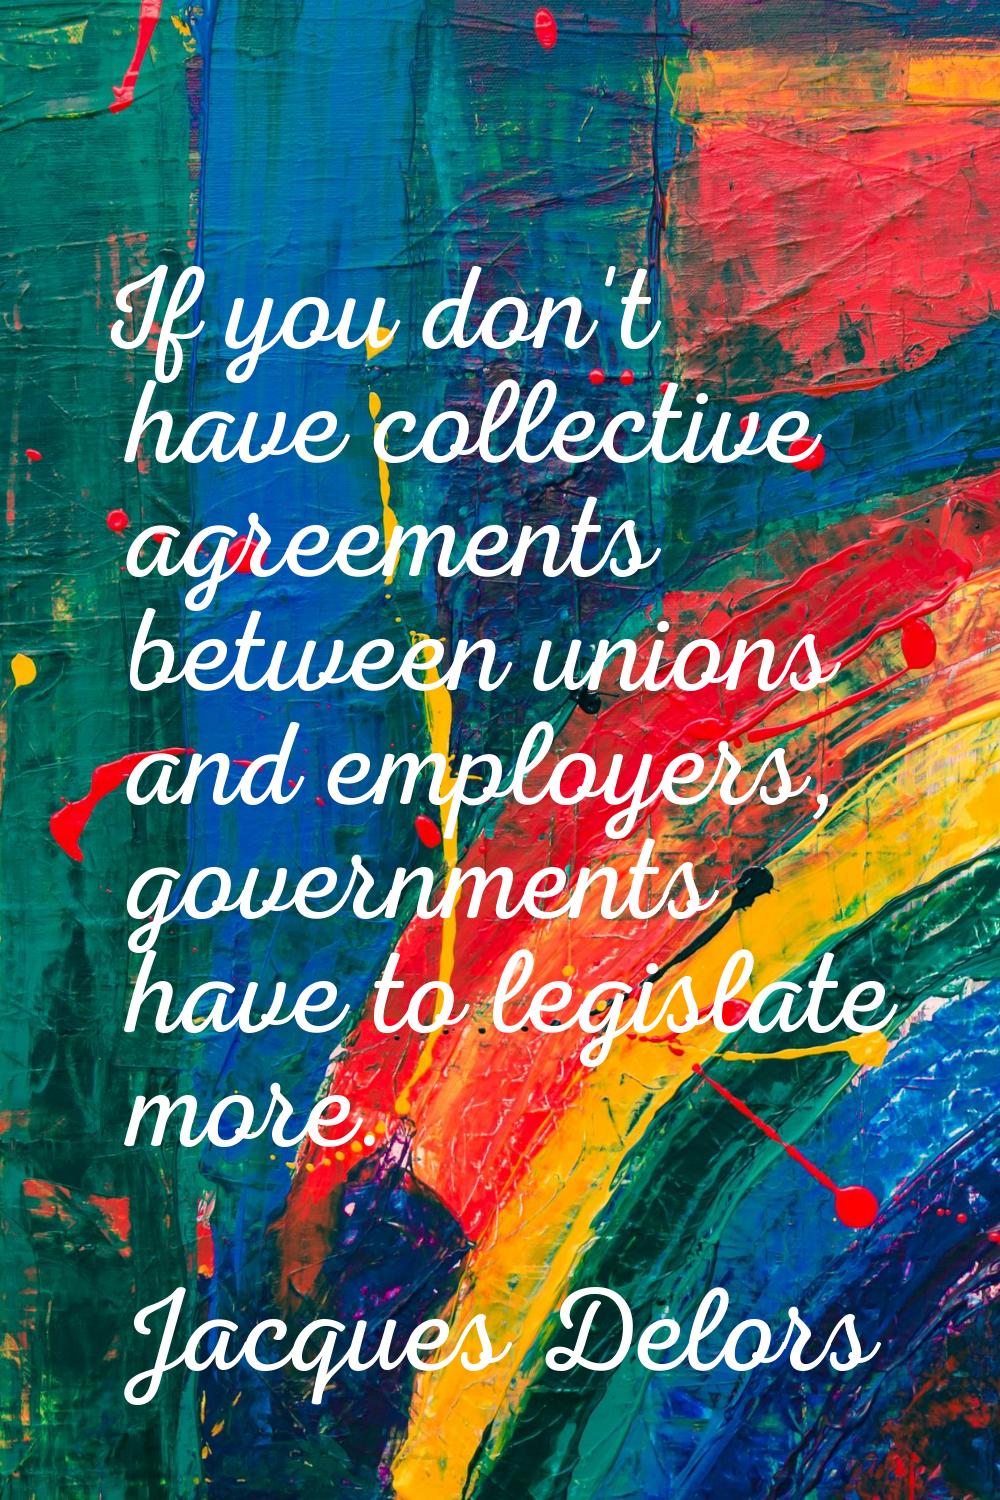 If you don't have collective agreements between unions and employers, governments have to legislate